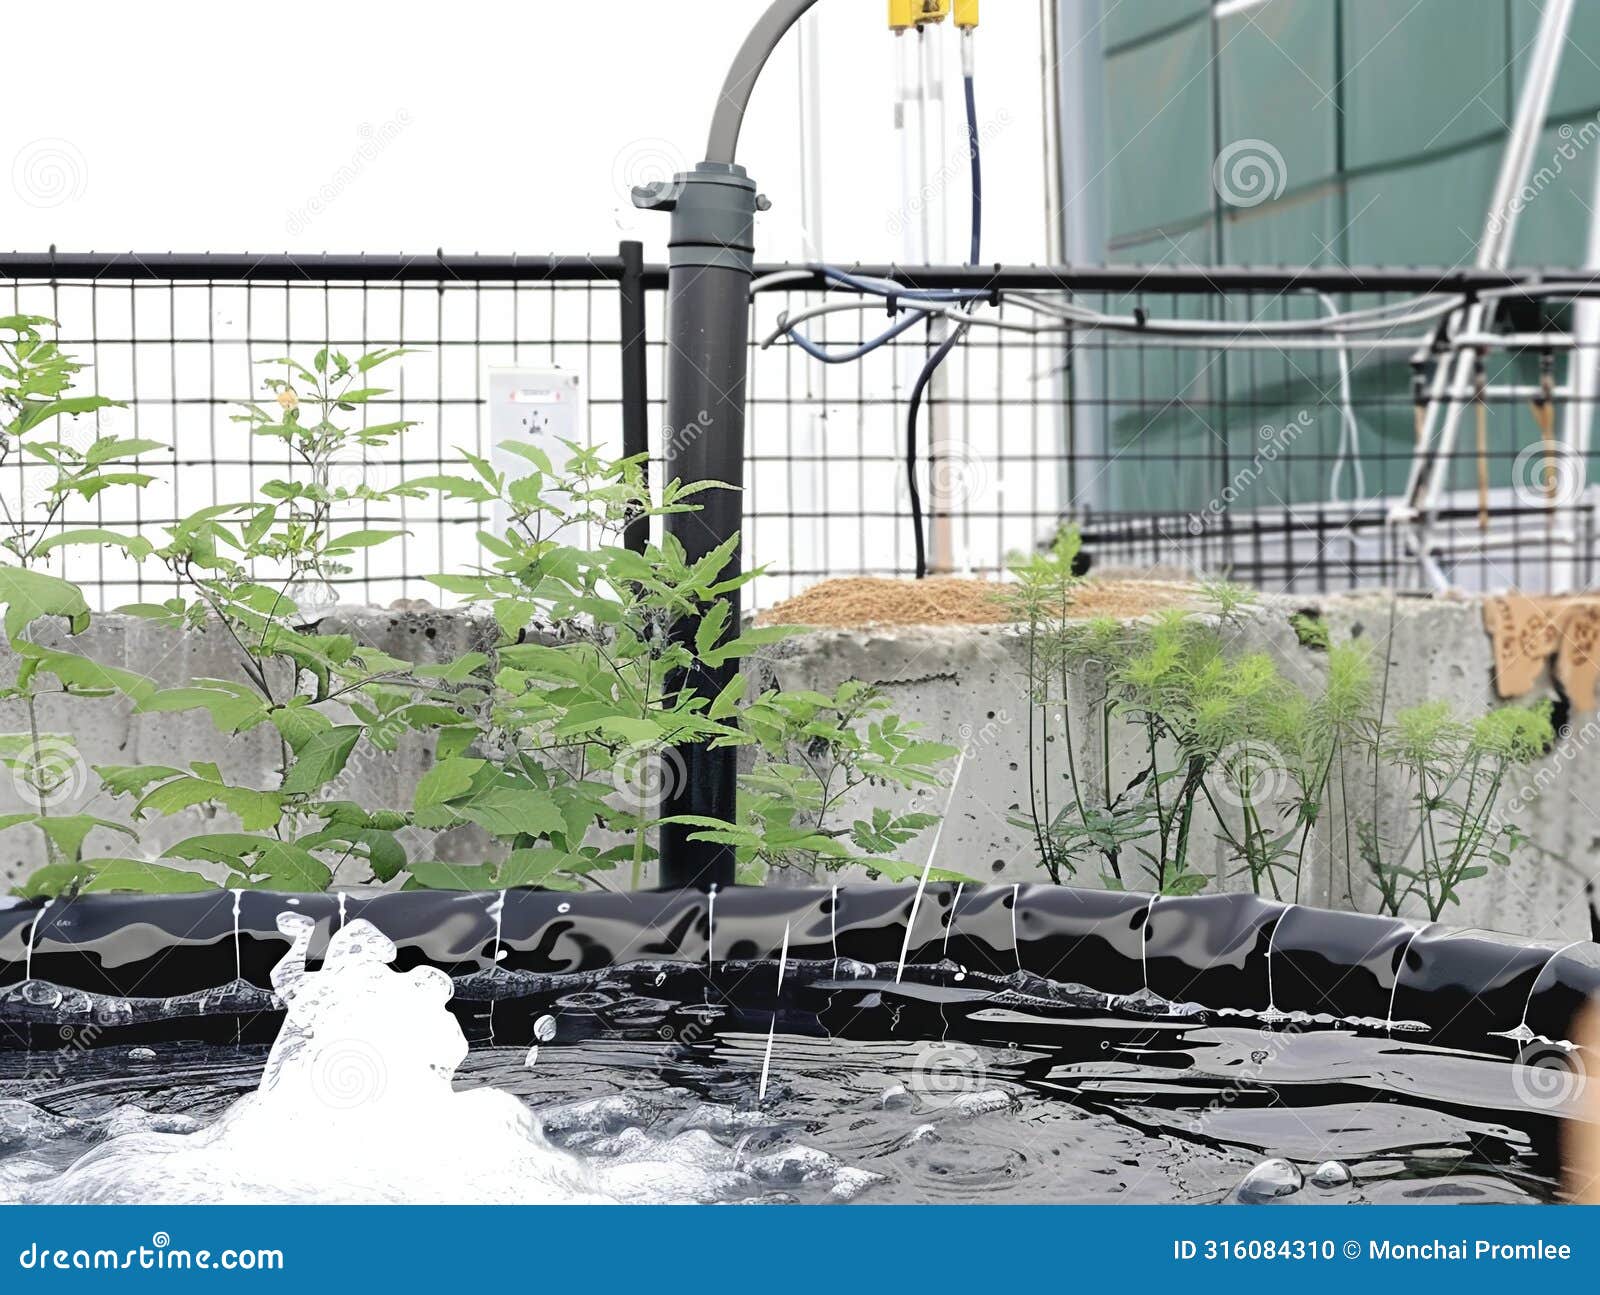 smart fabrics control climate and water in a startup's vertical farm, optimizing growth